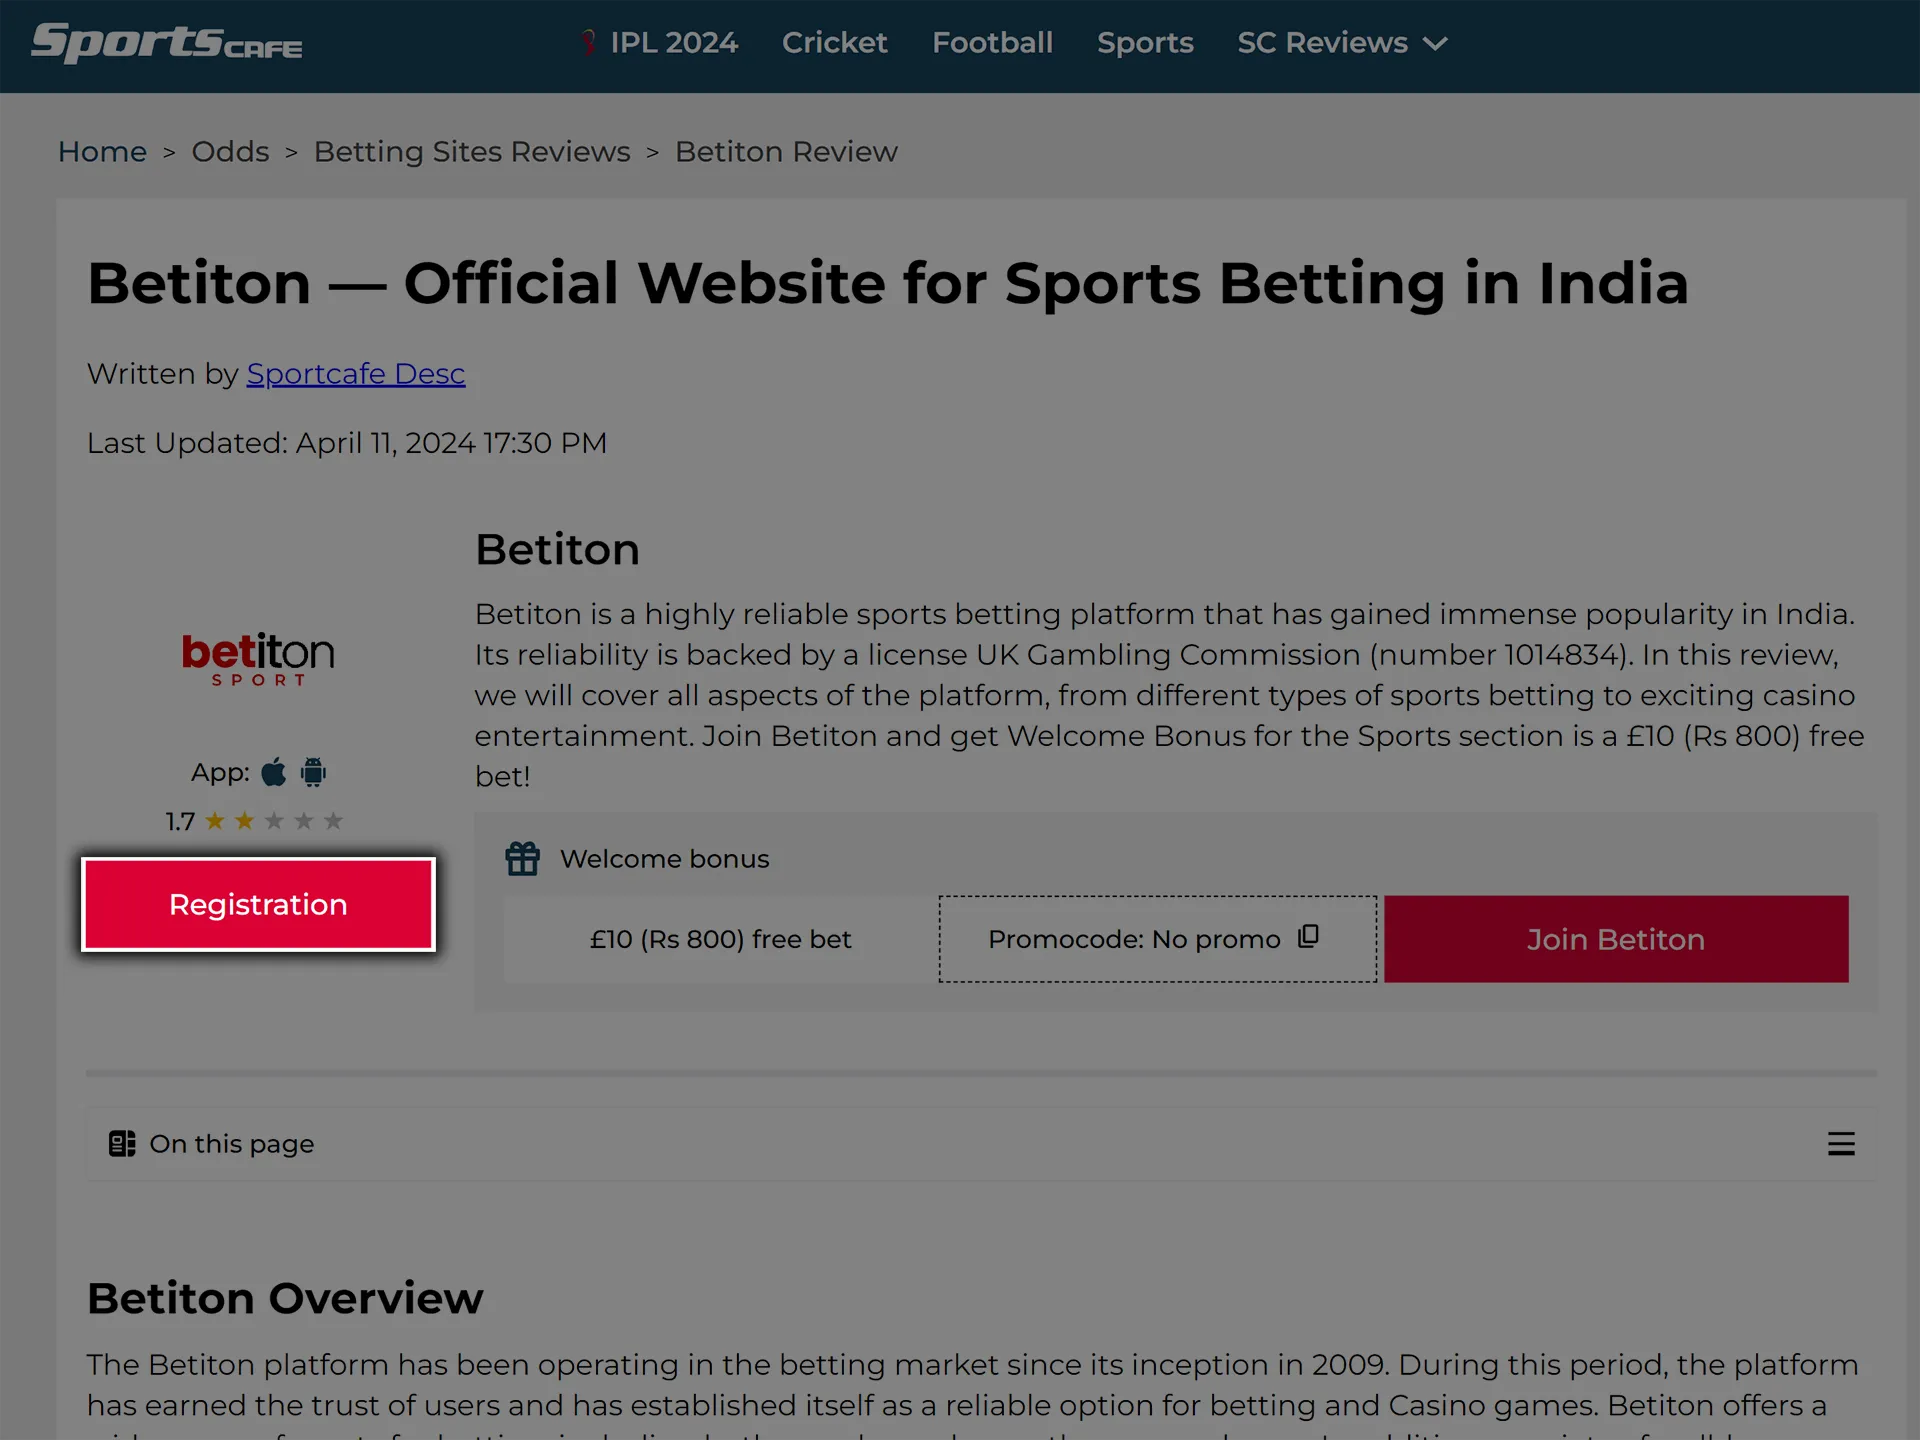 Click on the button to open the Betiton website.